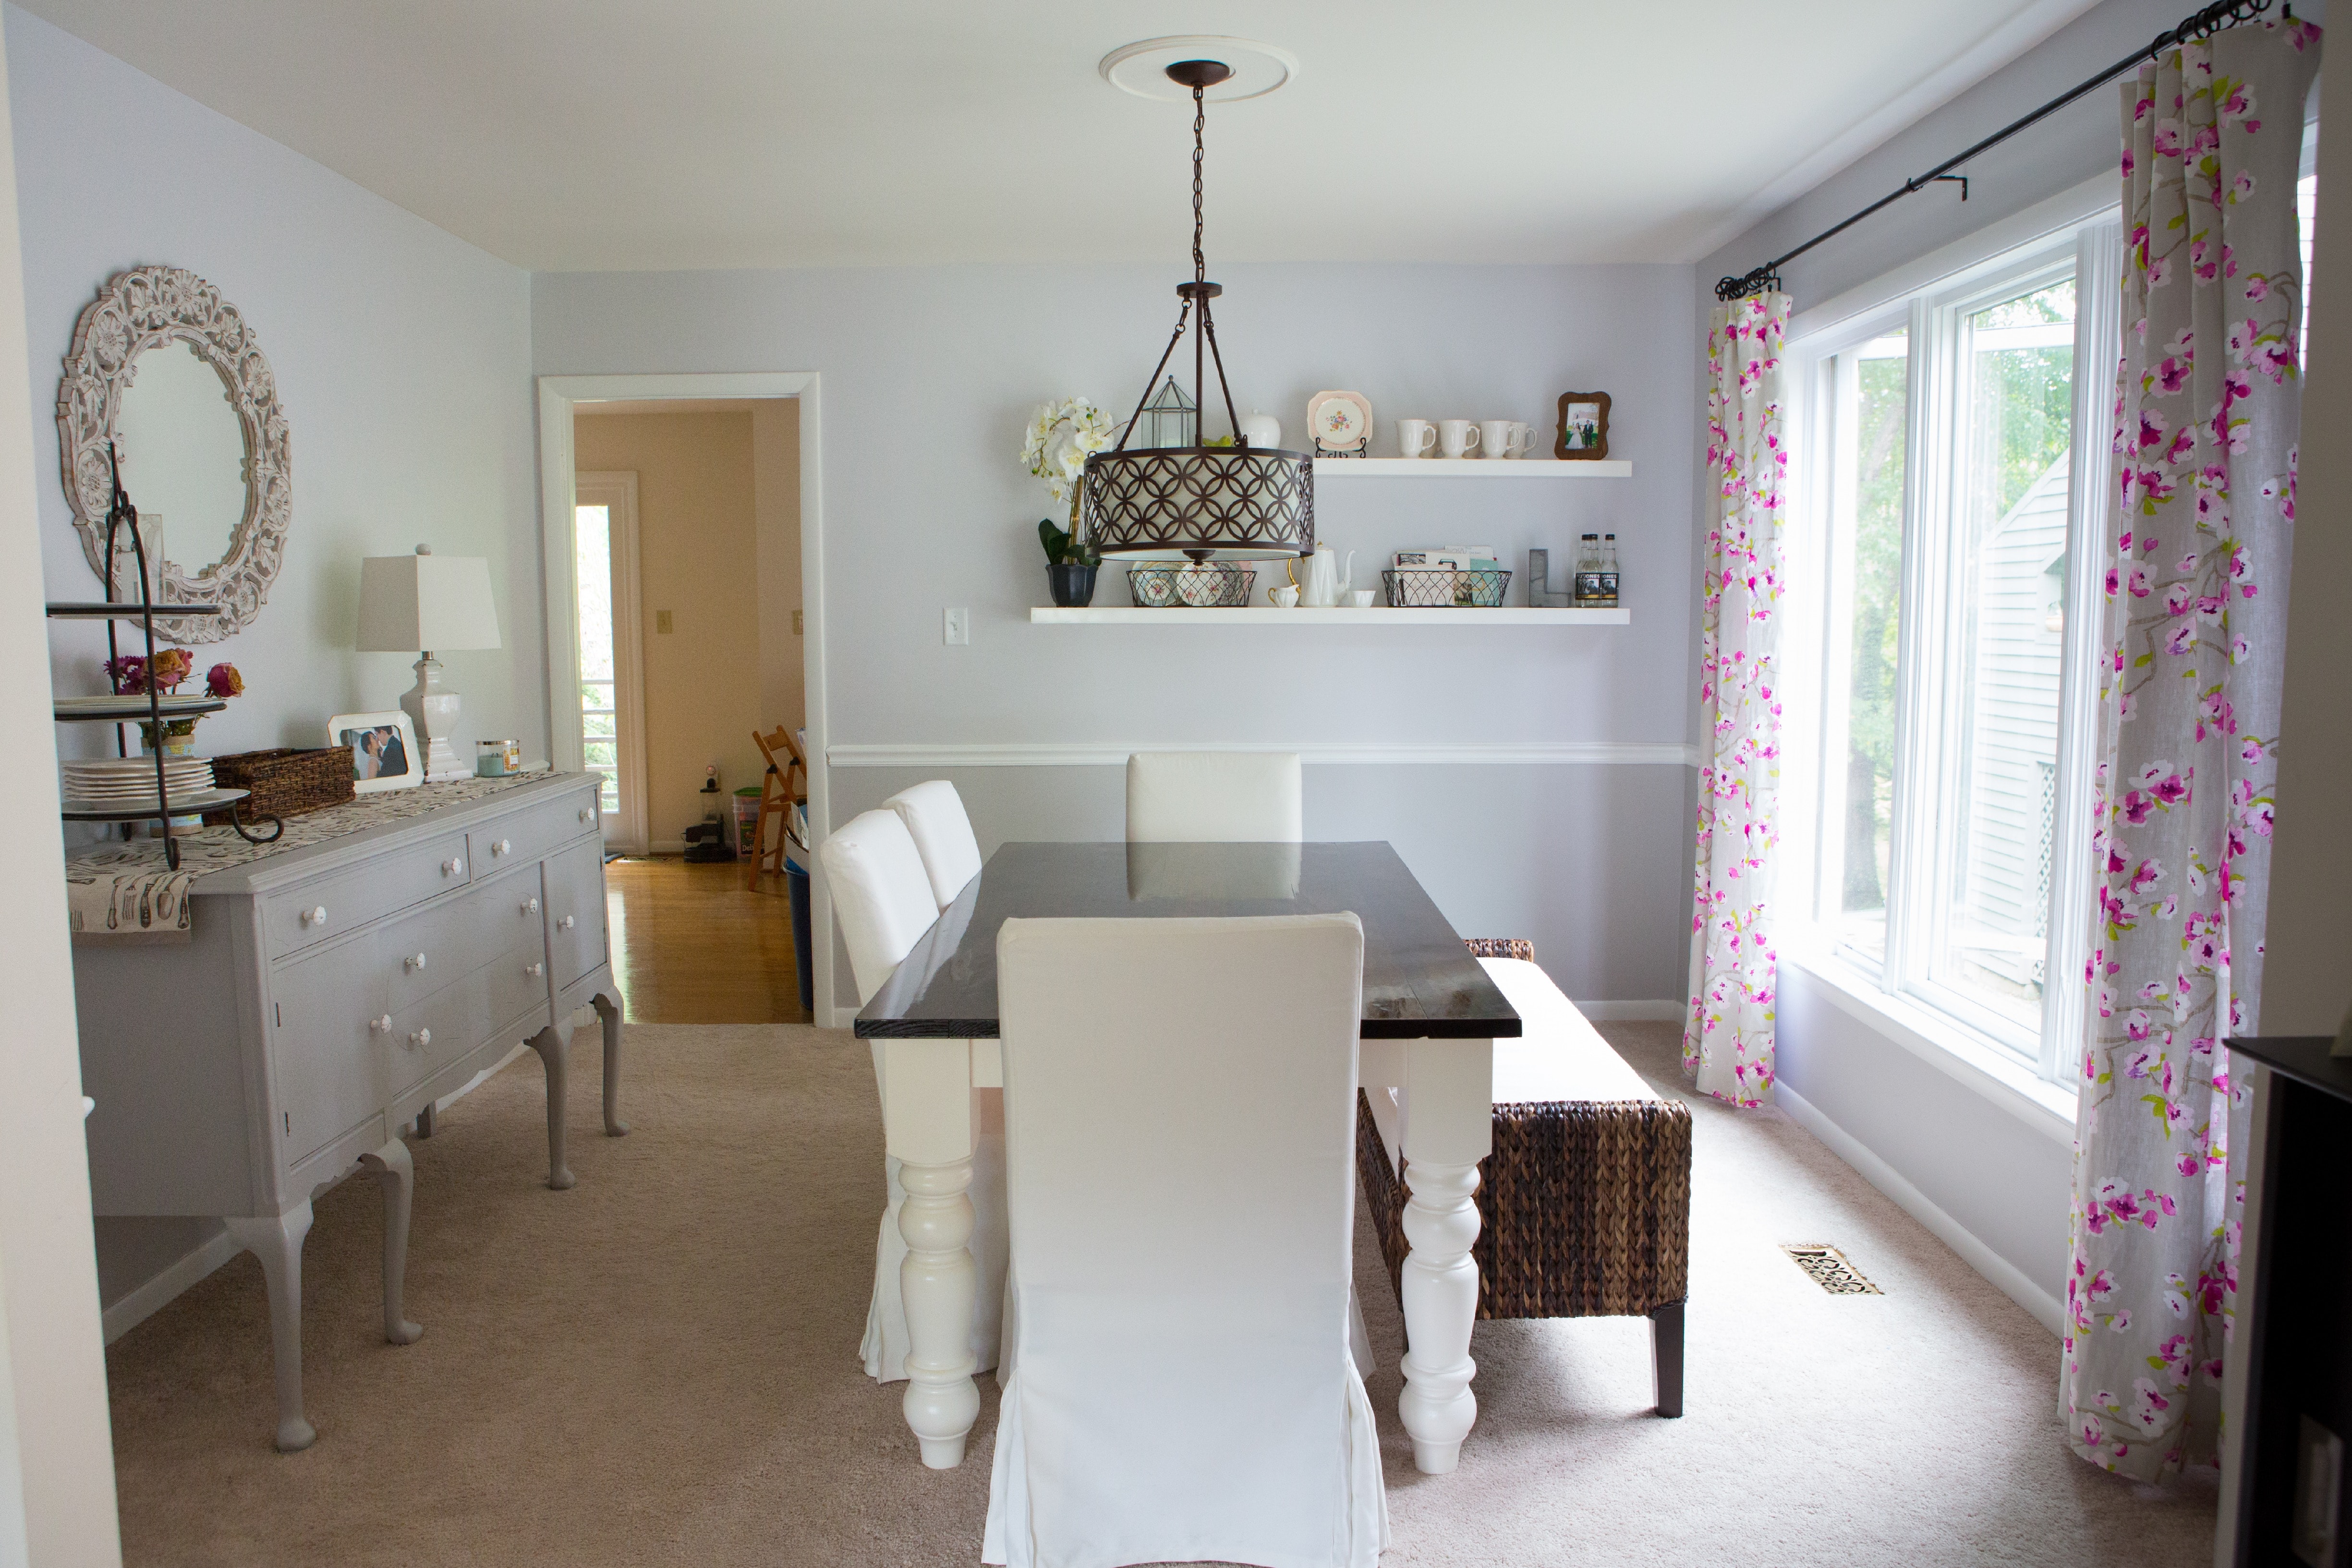 BEFORE & AFTER: Alex’s Darling Dining Room!